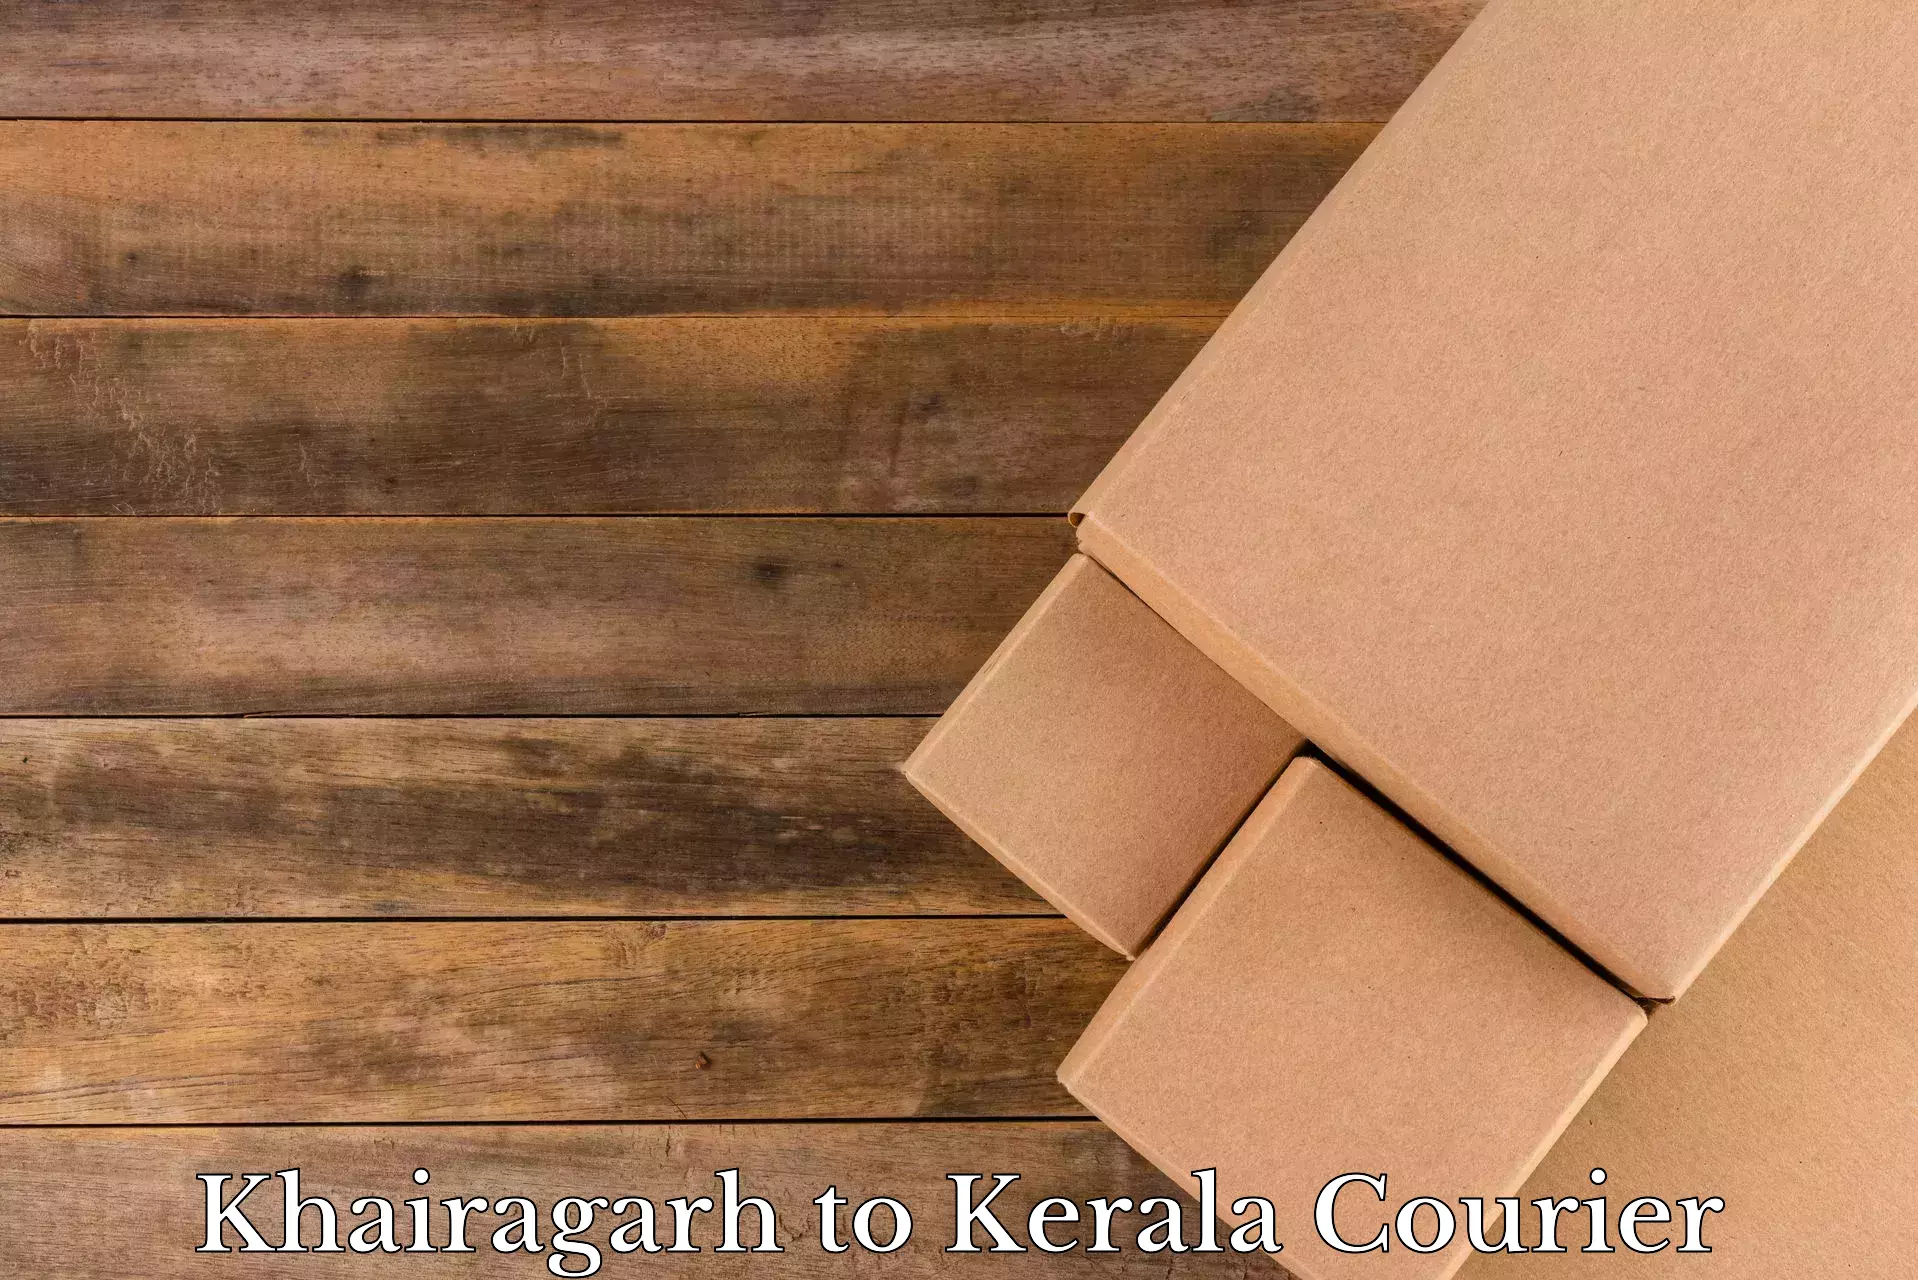 Trusted relocation experts Khairagarh to Wayanad